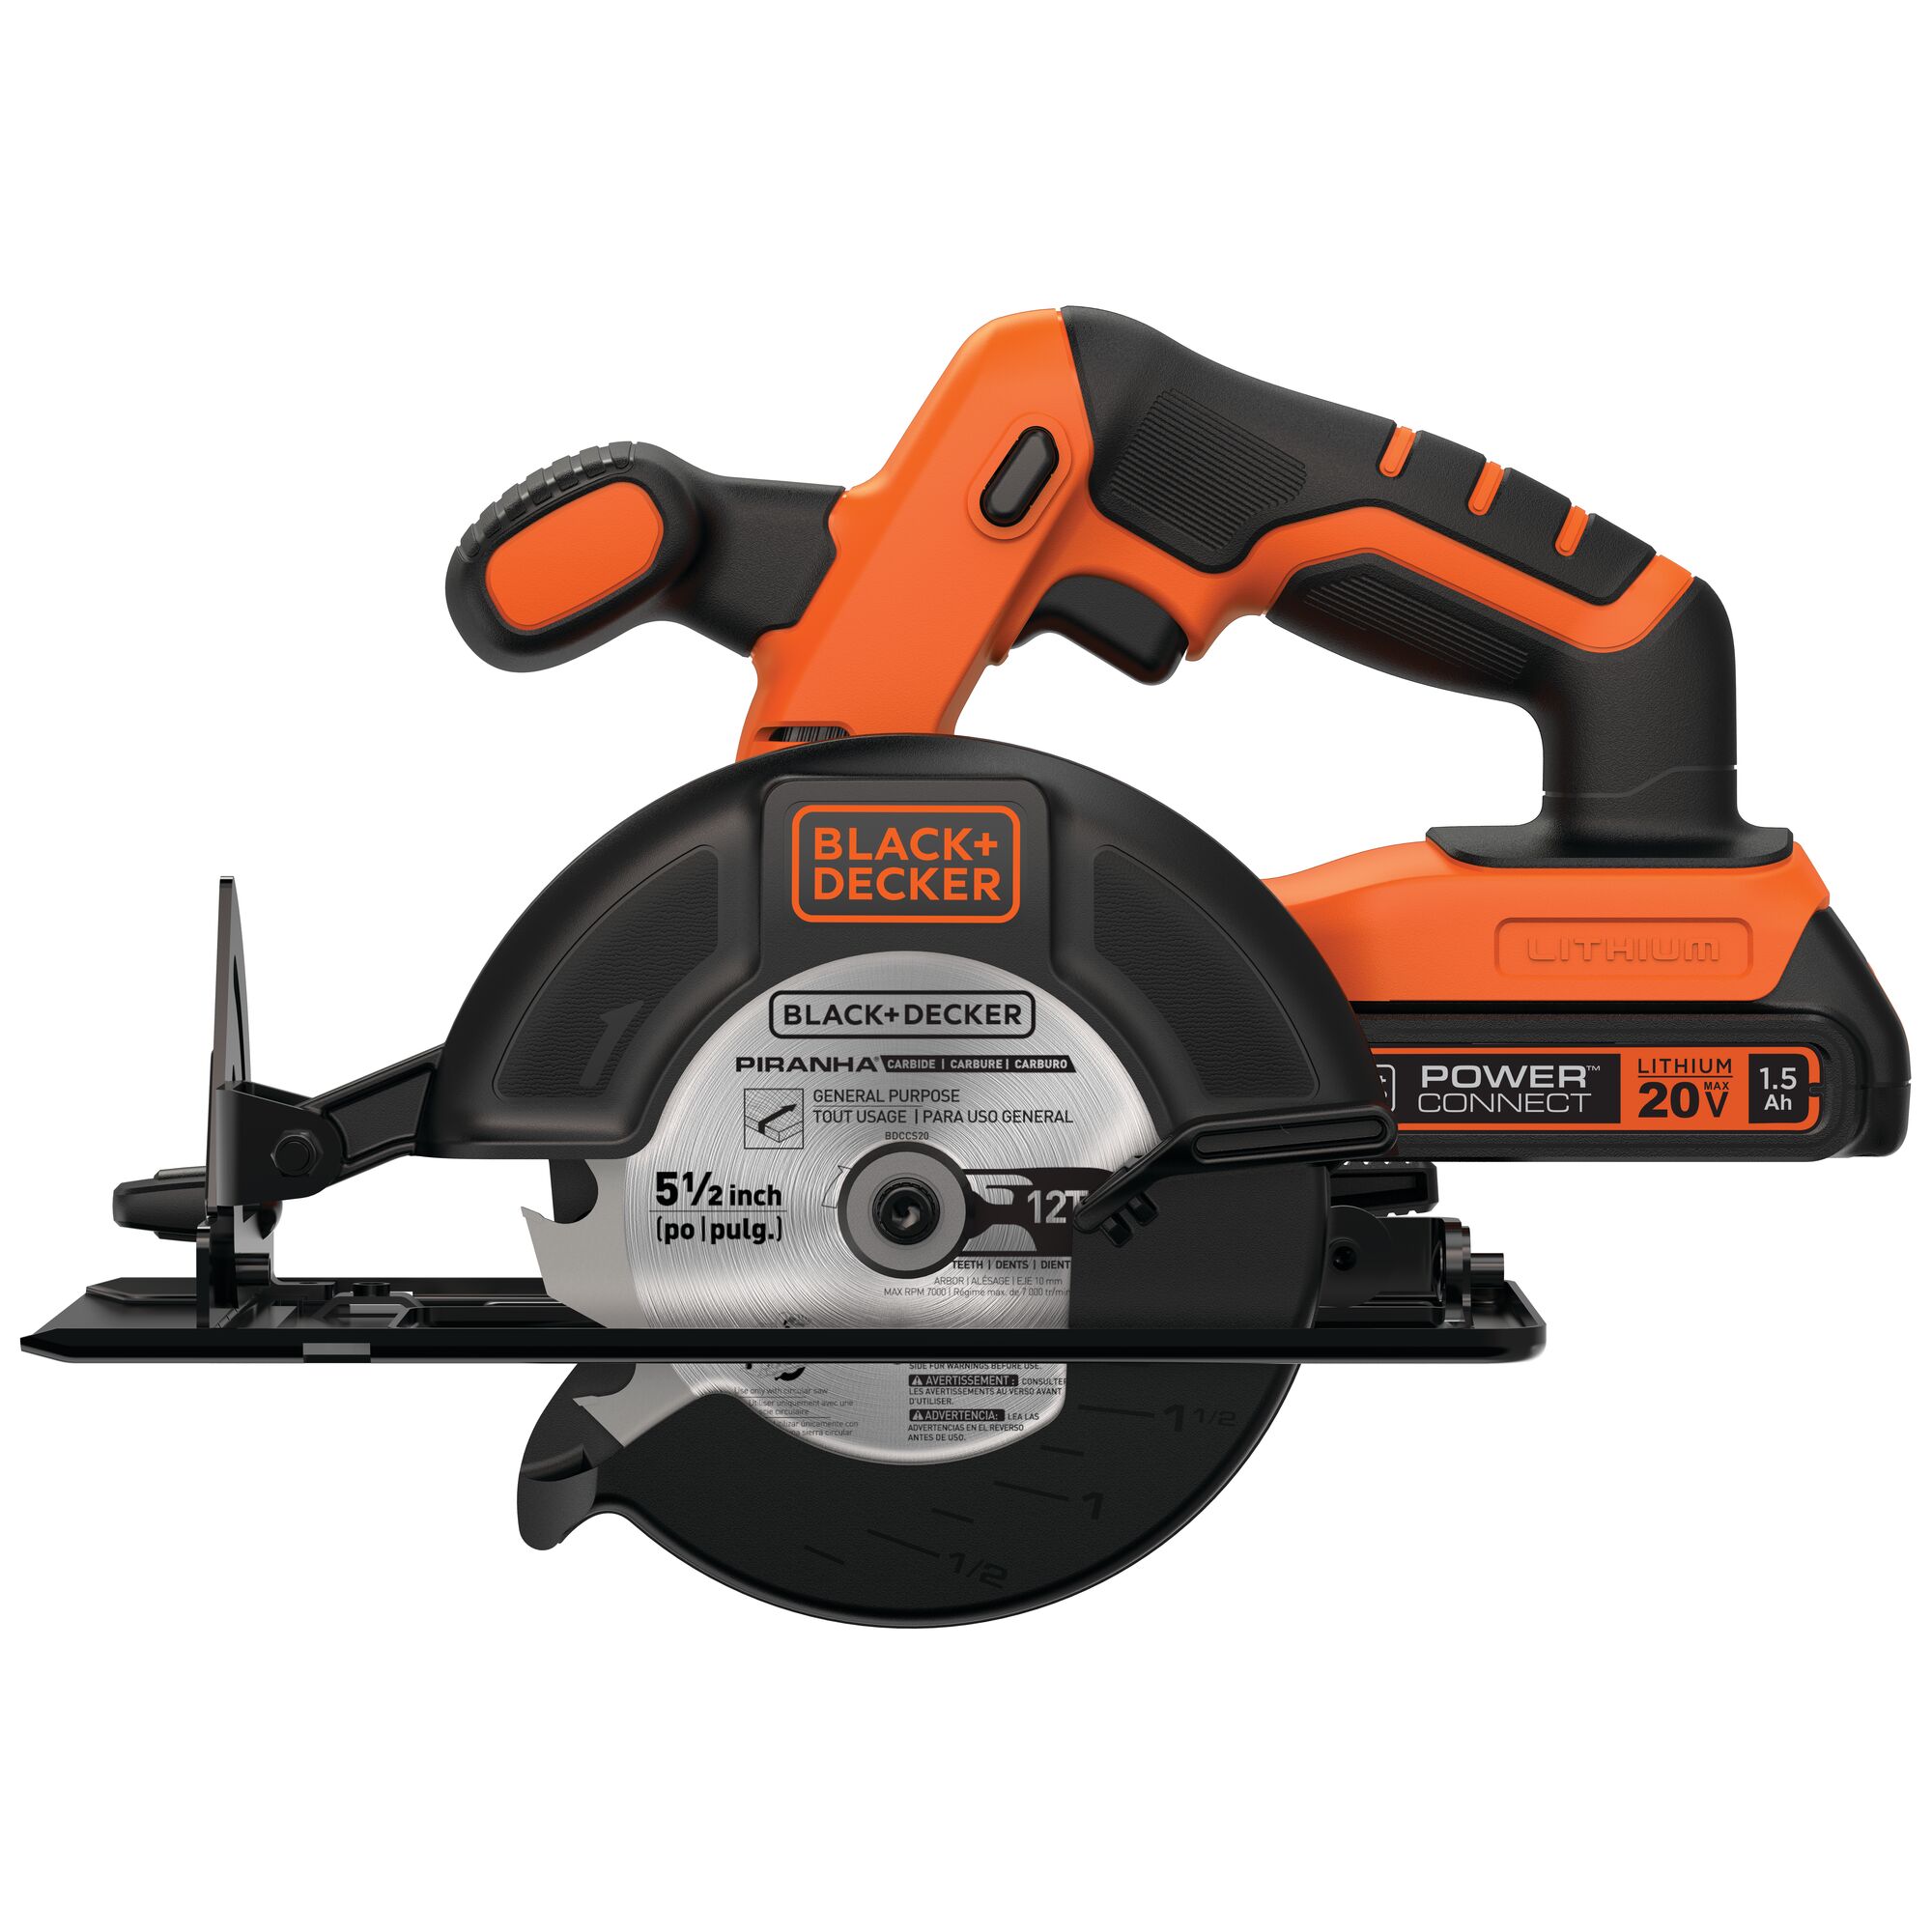 Profile of black and decker 20 volt five and a half inch cordless circular saw.